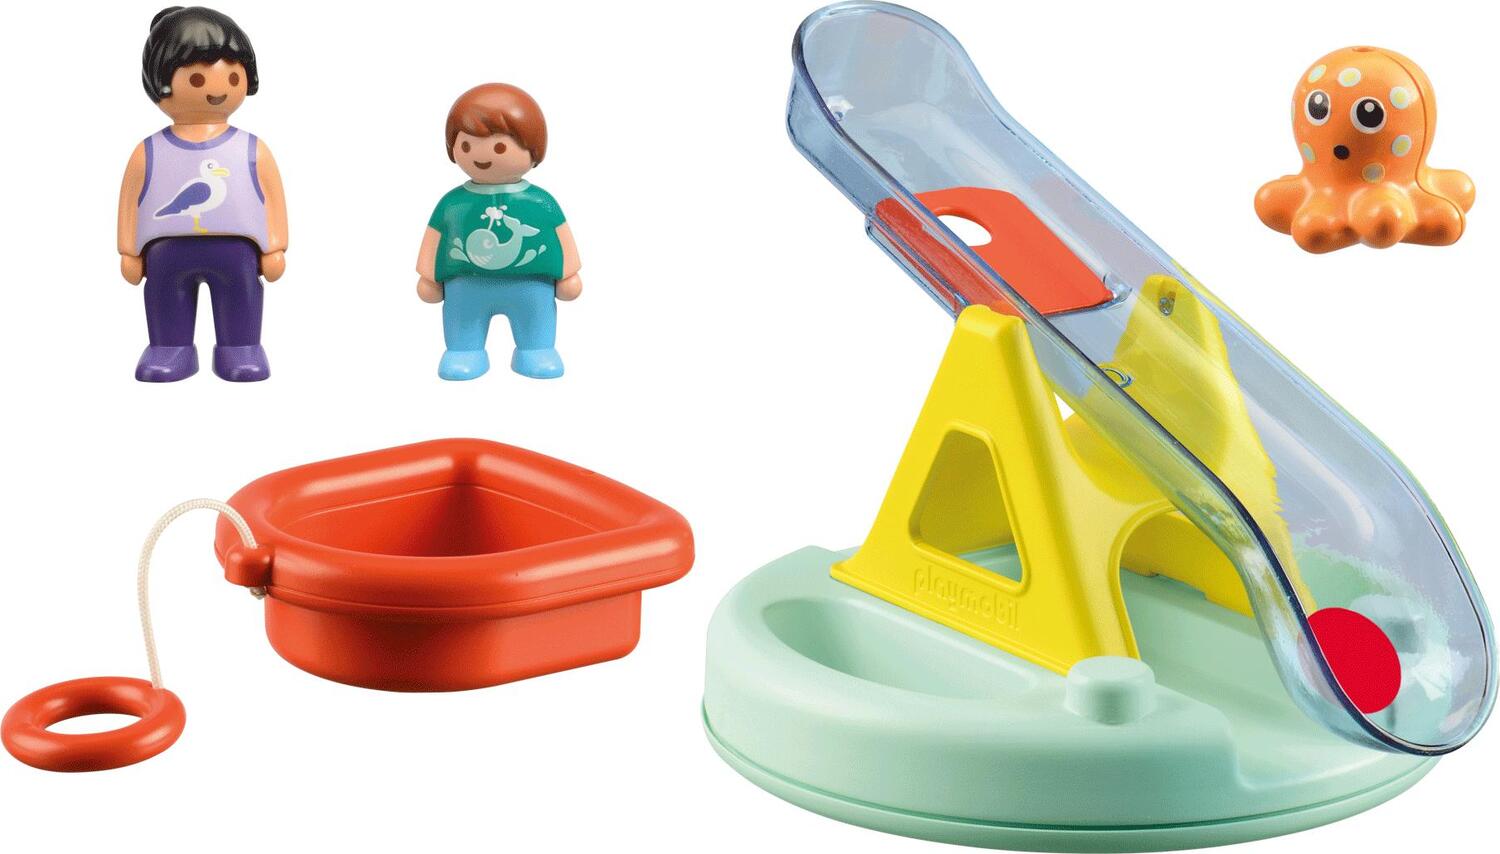 Playmobil Water Seesaw with Boat - Imagination Toys